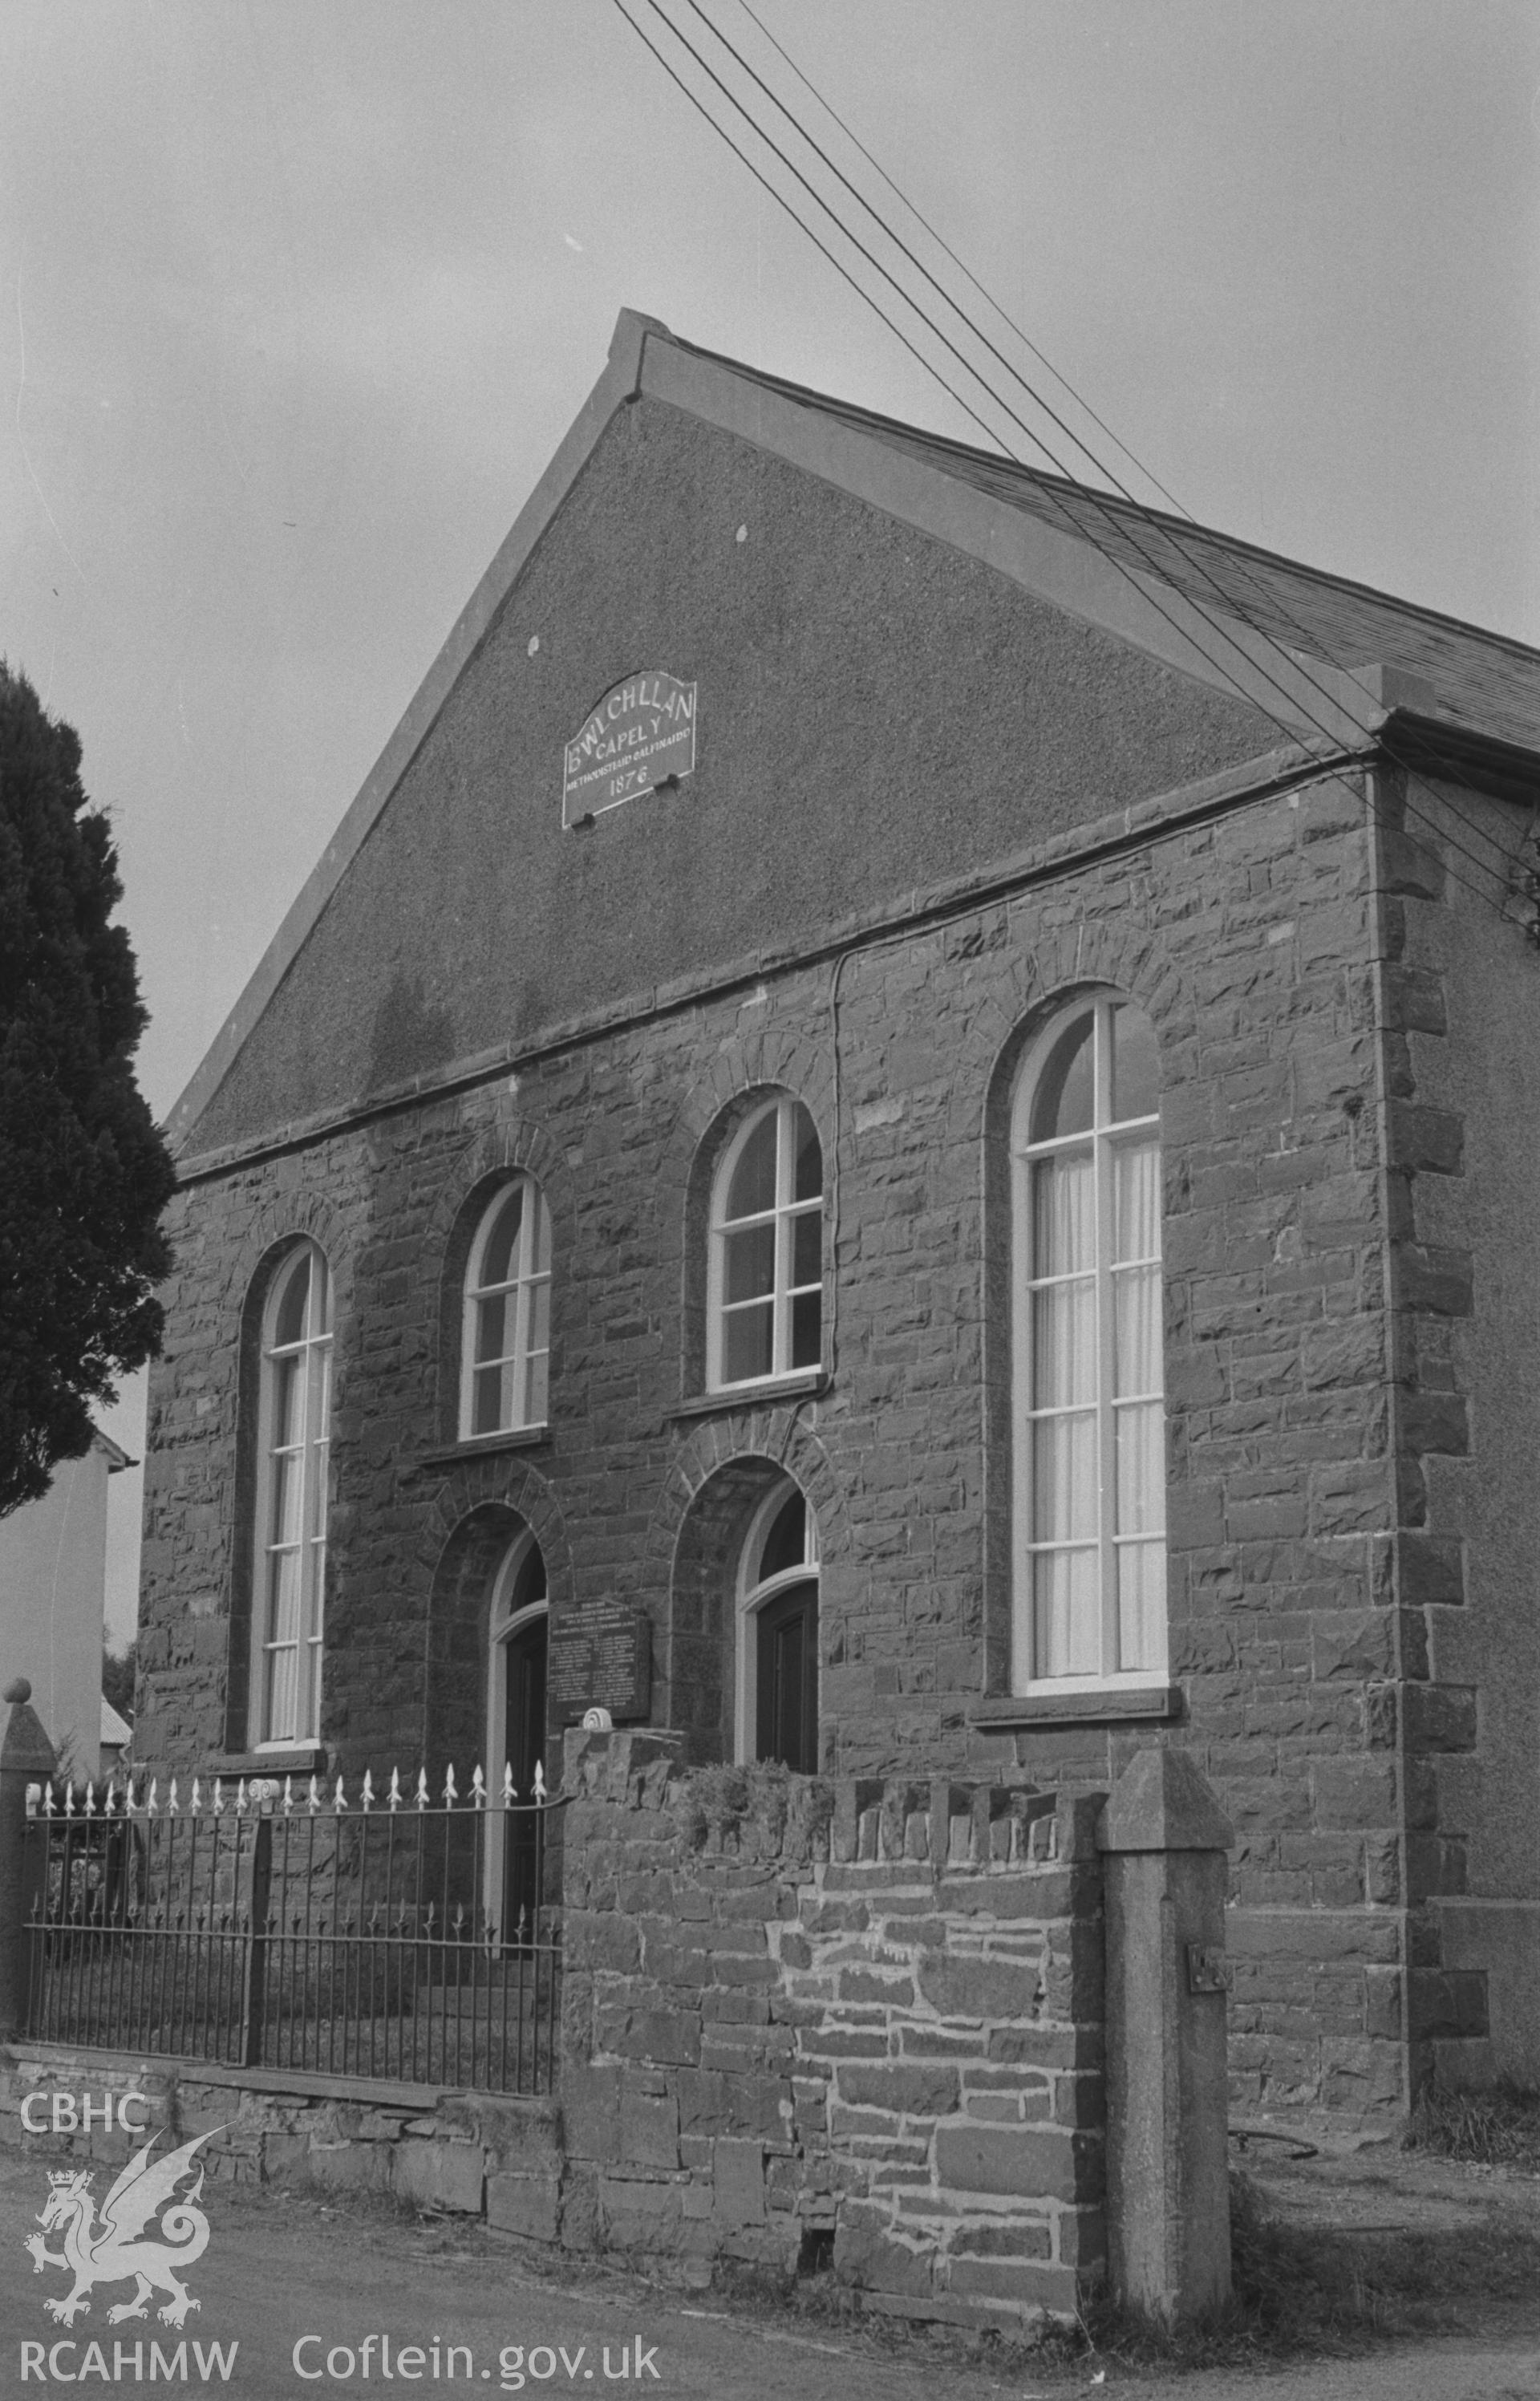 Digital copy of a black and white negative showing exterior view of Capel Bwlchllan Calvinistic Methodist chapel, Nantcwnlle, north of Lampeter. Photographed by Arthur O. Chater on 30th August 1966 looking north from Grid Reference SN 580 588.